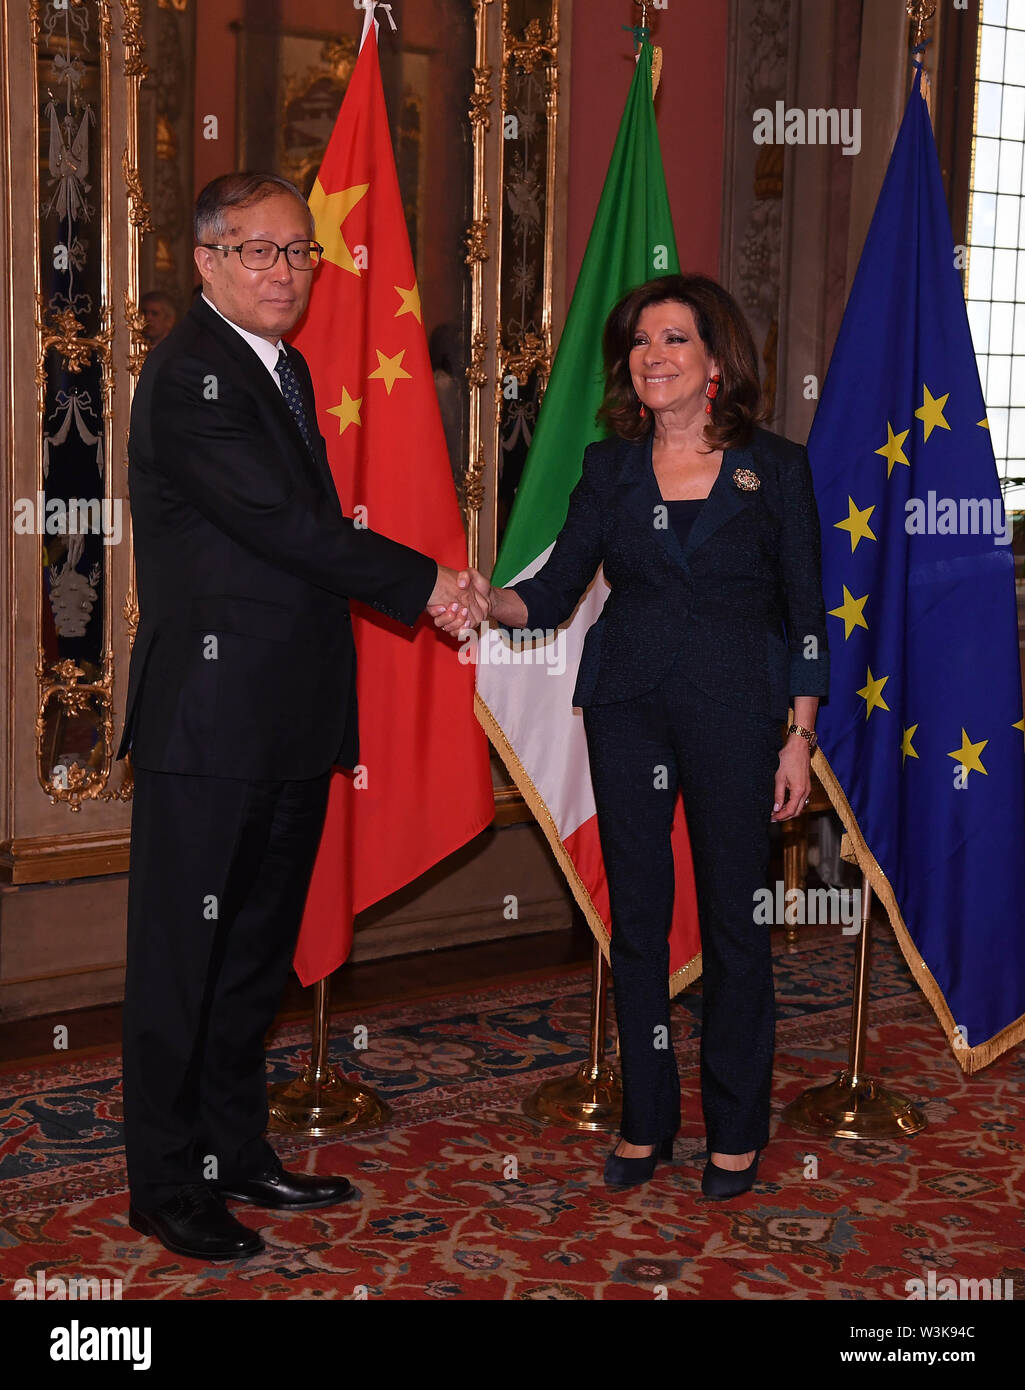 Rome, Italy. 16th July, 2019. Li Hongzhong (L), a member of the Political Bureau of the Communist Party of China (CPC) Central Committee and Secretary of the CPC Tianjin Municipal Committee, meets with Maria Elisabetta Alberti Casellati, president of the Italian Senate, in Rome, Italy, July 16, 2019. A delegation of the CPC headed by Li concluded its four-day visit to Italy at the invitation of Italian government on Tuesday. Credit: Alberto Lingria/Xinhua/Alamy Live News Stock Photo